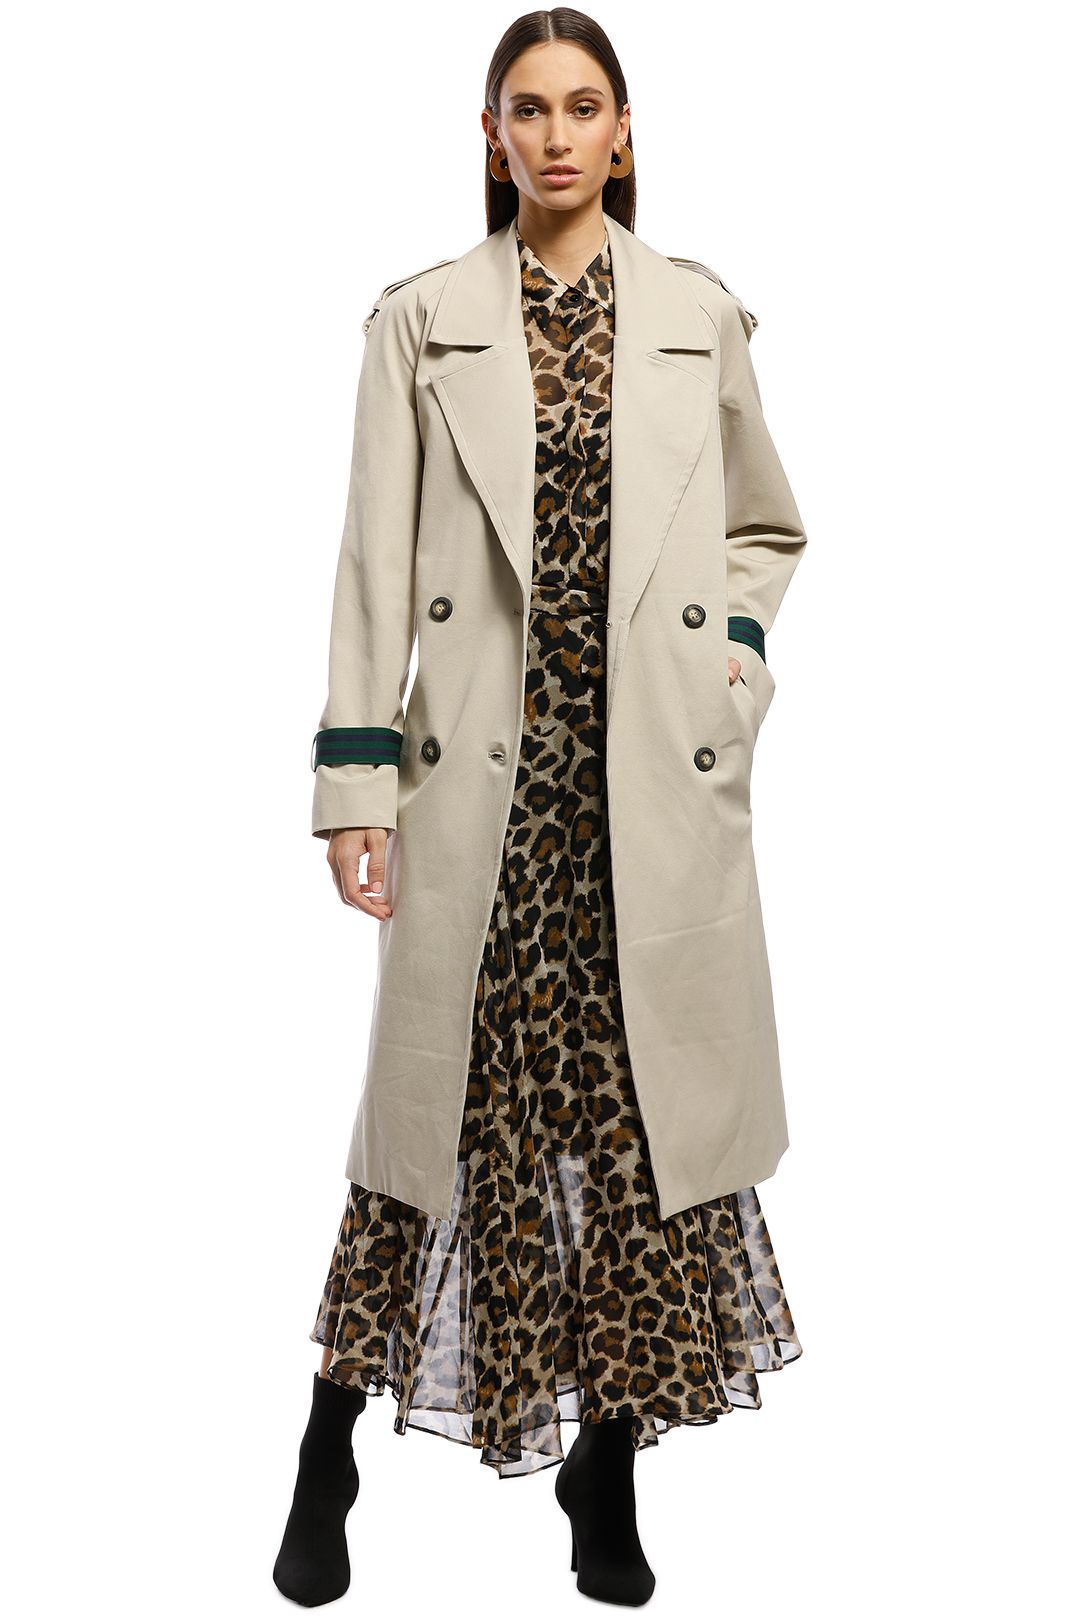 AKIN by Ginger & Smart - Breeze Trench - Taupe - Front